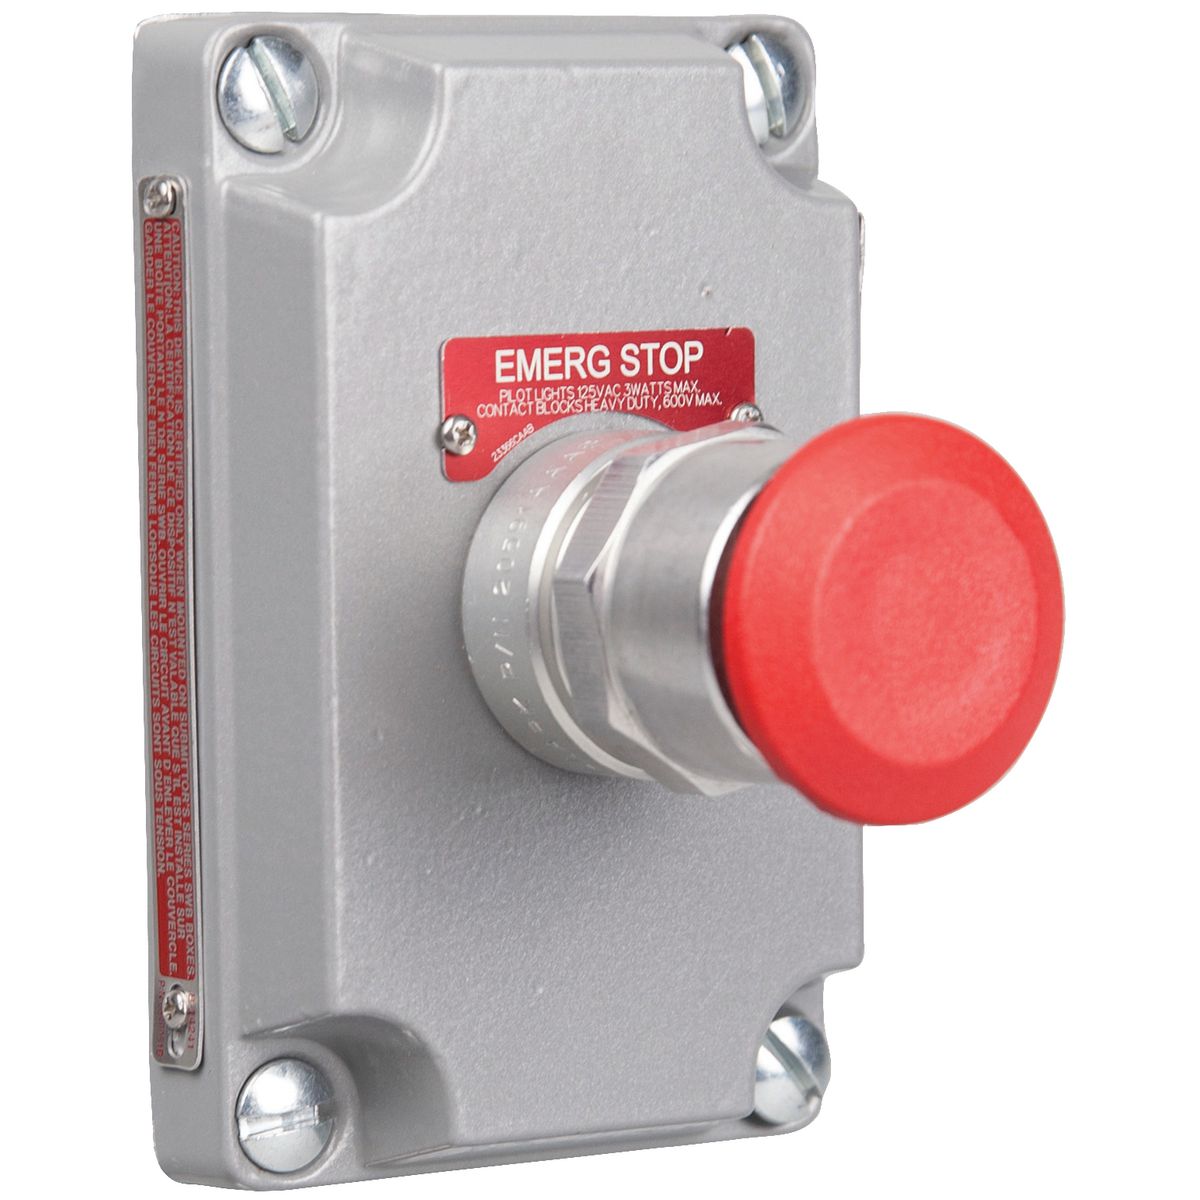 XCS SERIES - ALUMINUM MAINTAINED CONTACT PUSH/PULL BUTTON COVER WITHDEVICE - RED MUSHROOM BUTTON SUPPLIED WITH THREE NAMEPLATES(